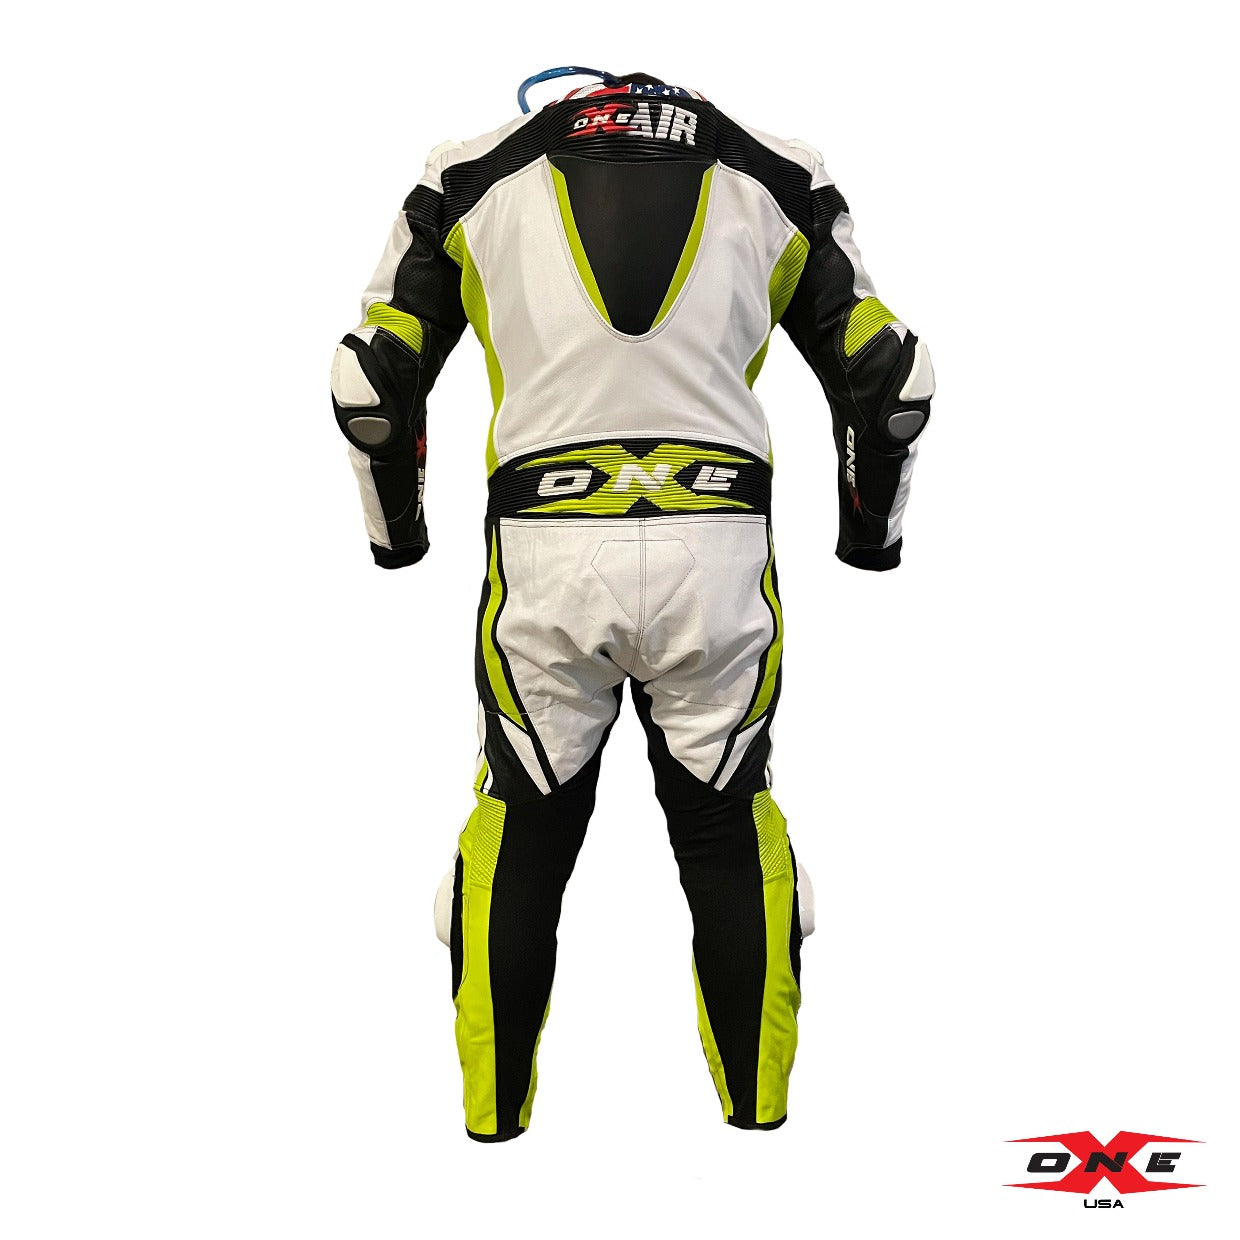 OneX USA XR22 Airbag Ready Pro Race Suit - White/Fluor Yellow